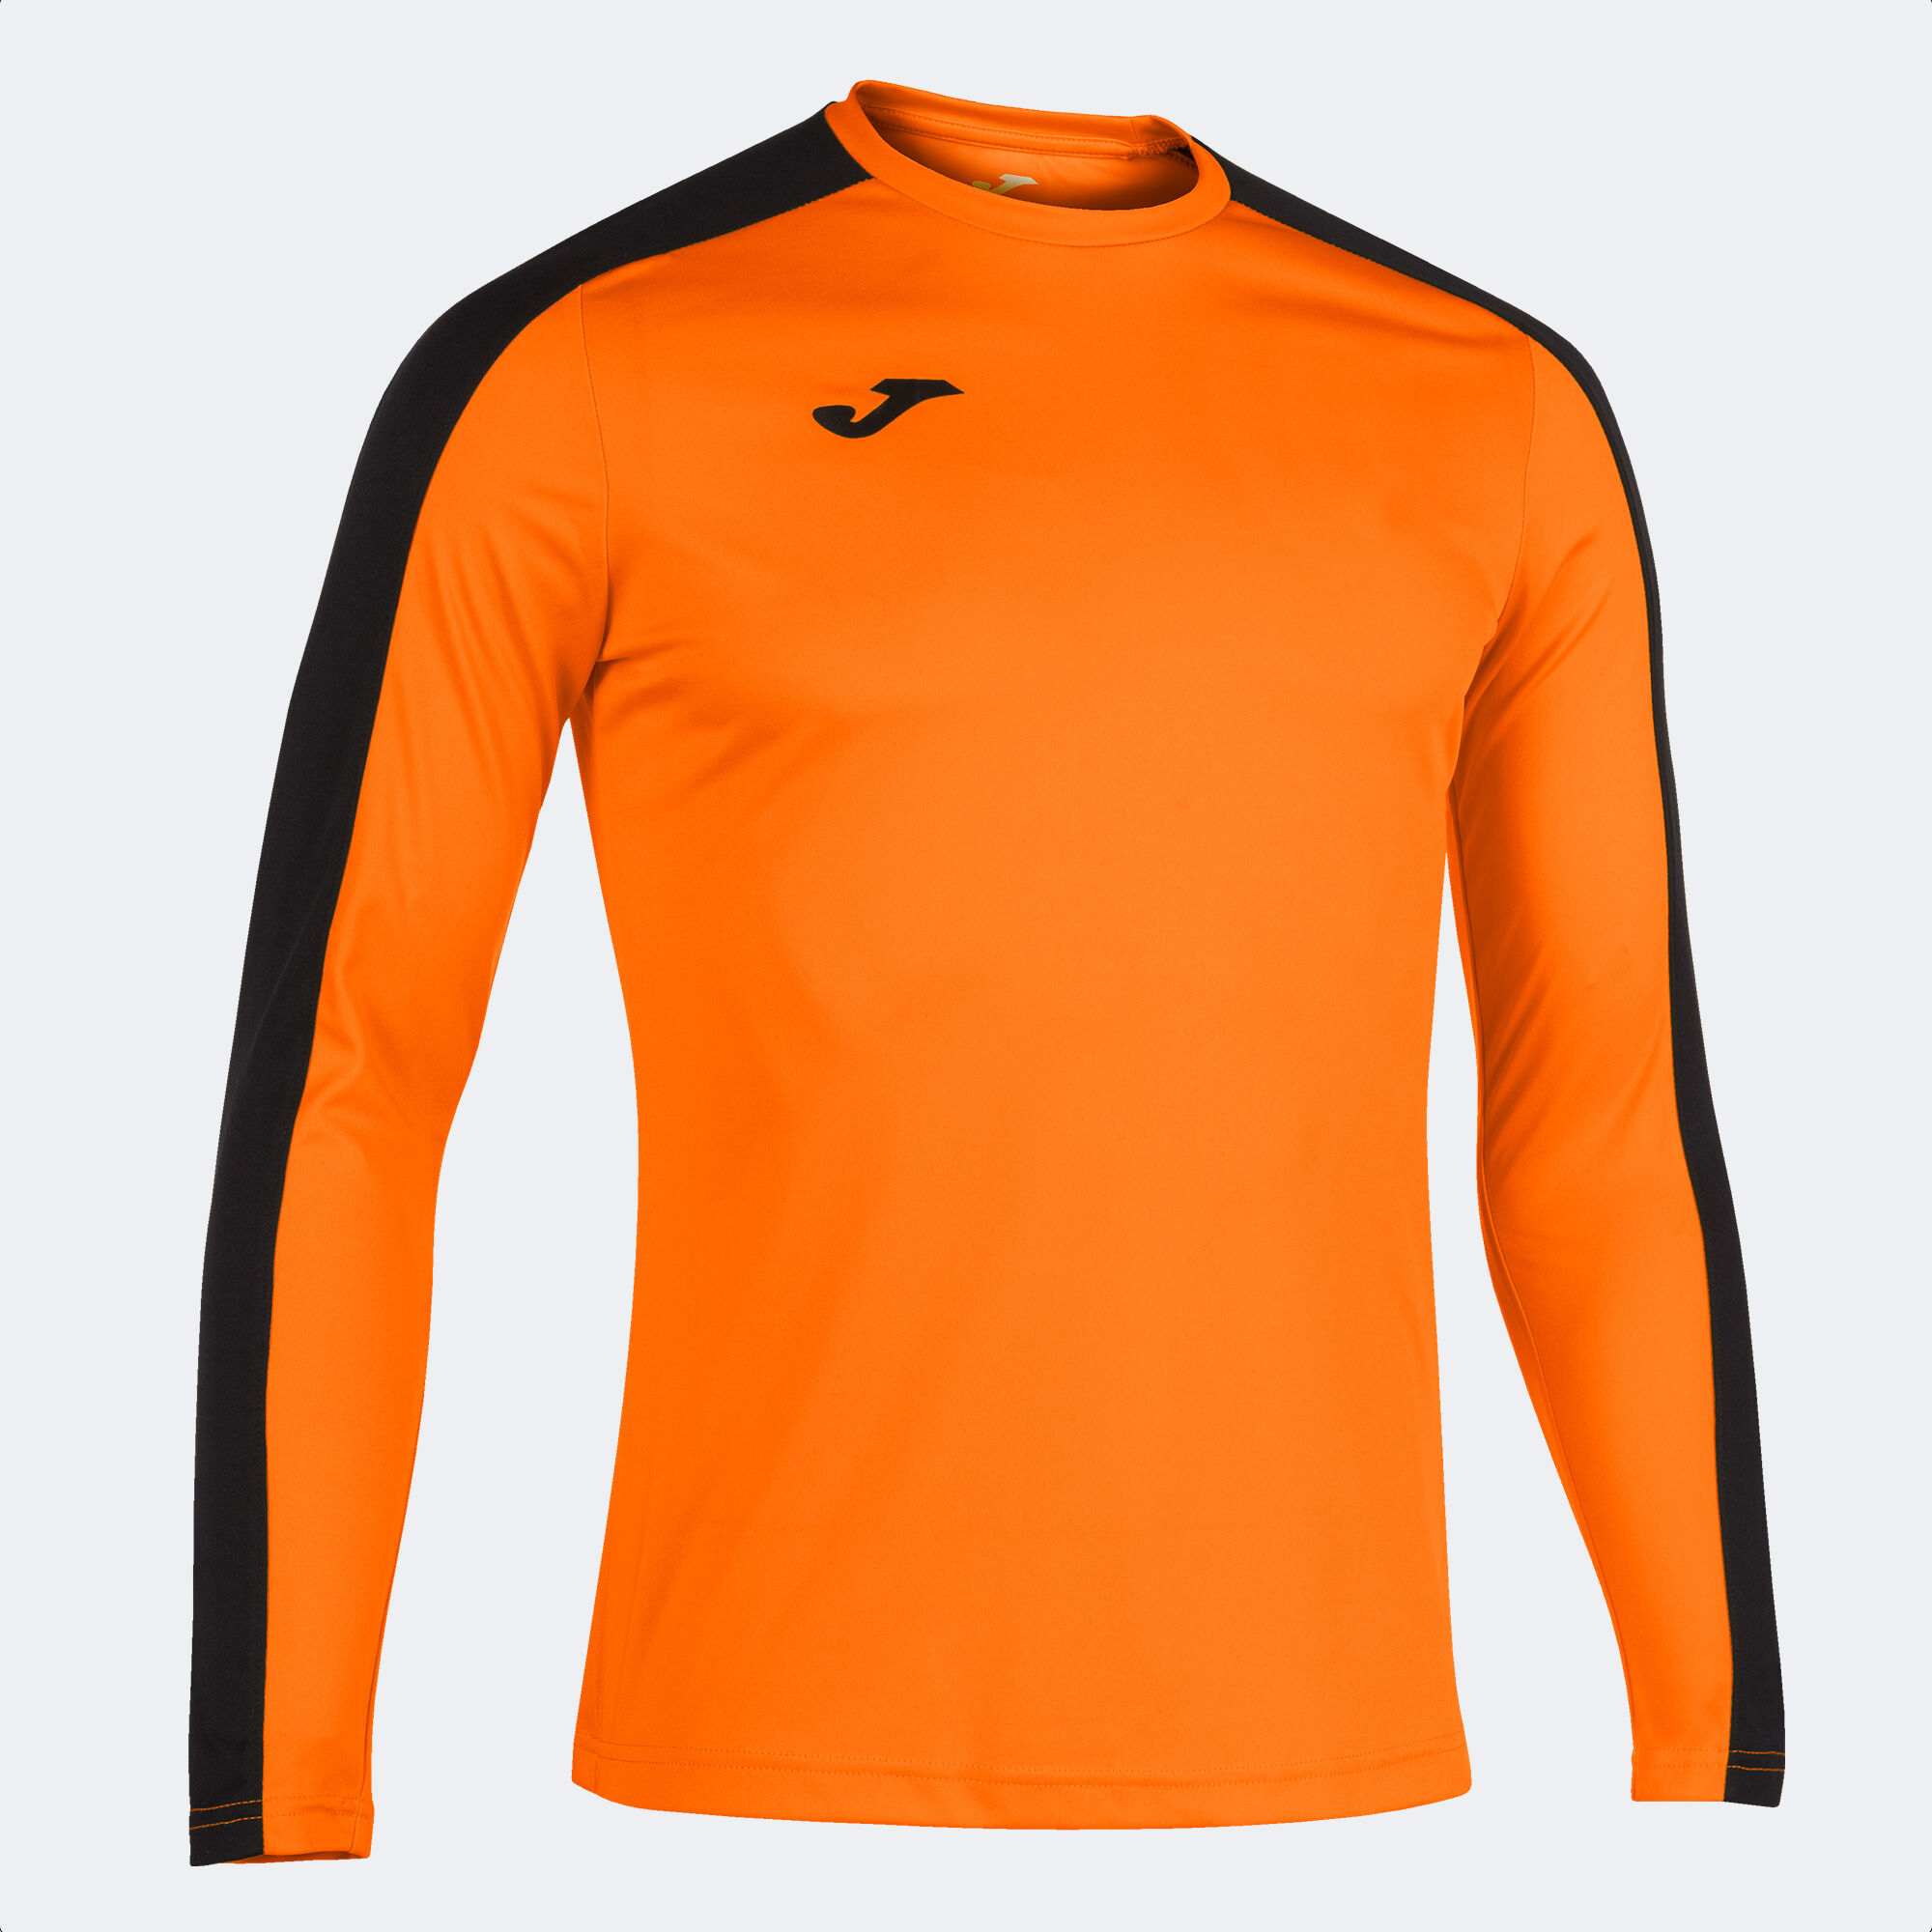 Maillot manches longues homme Academy III orange noir